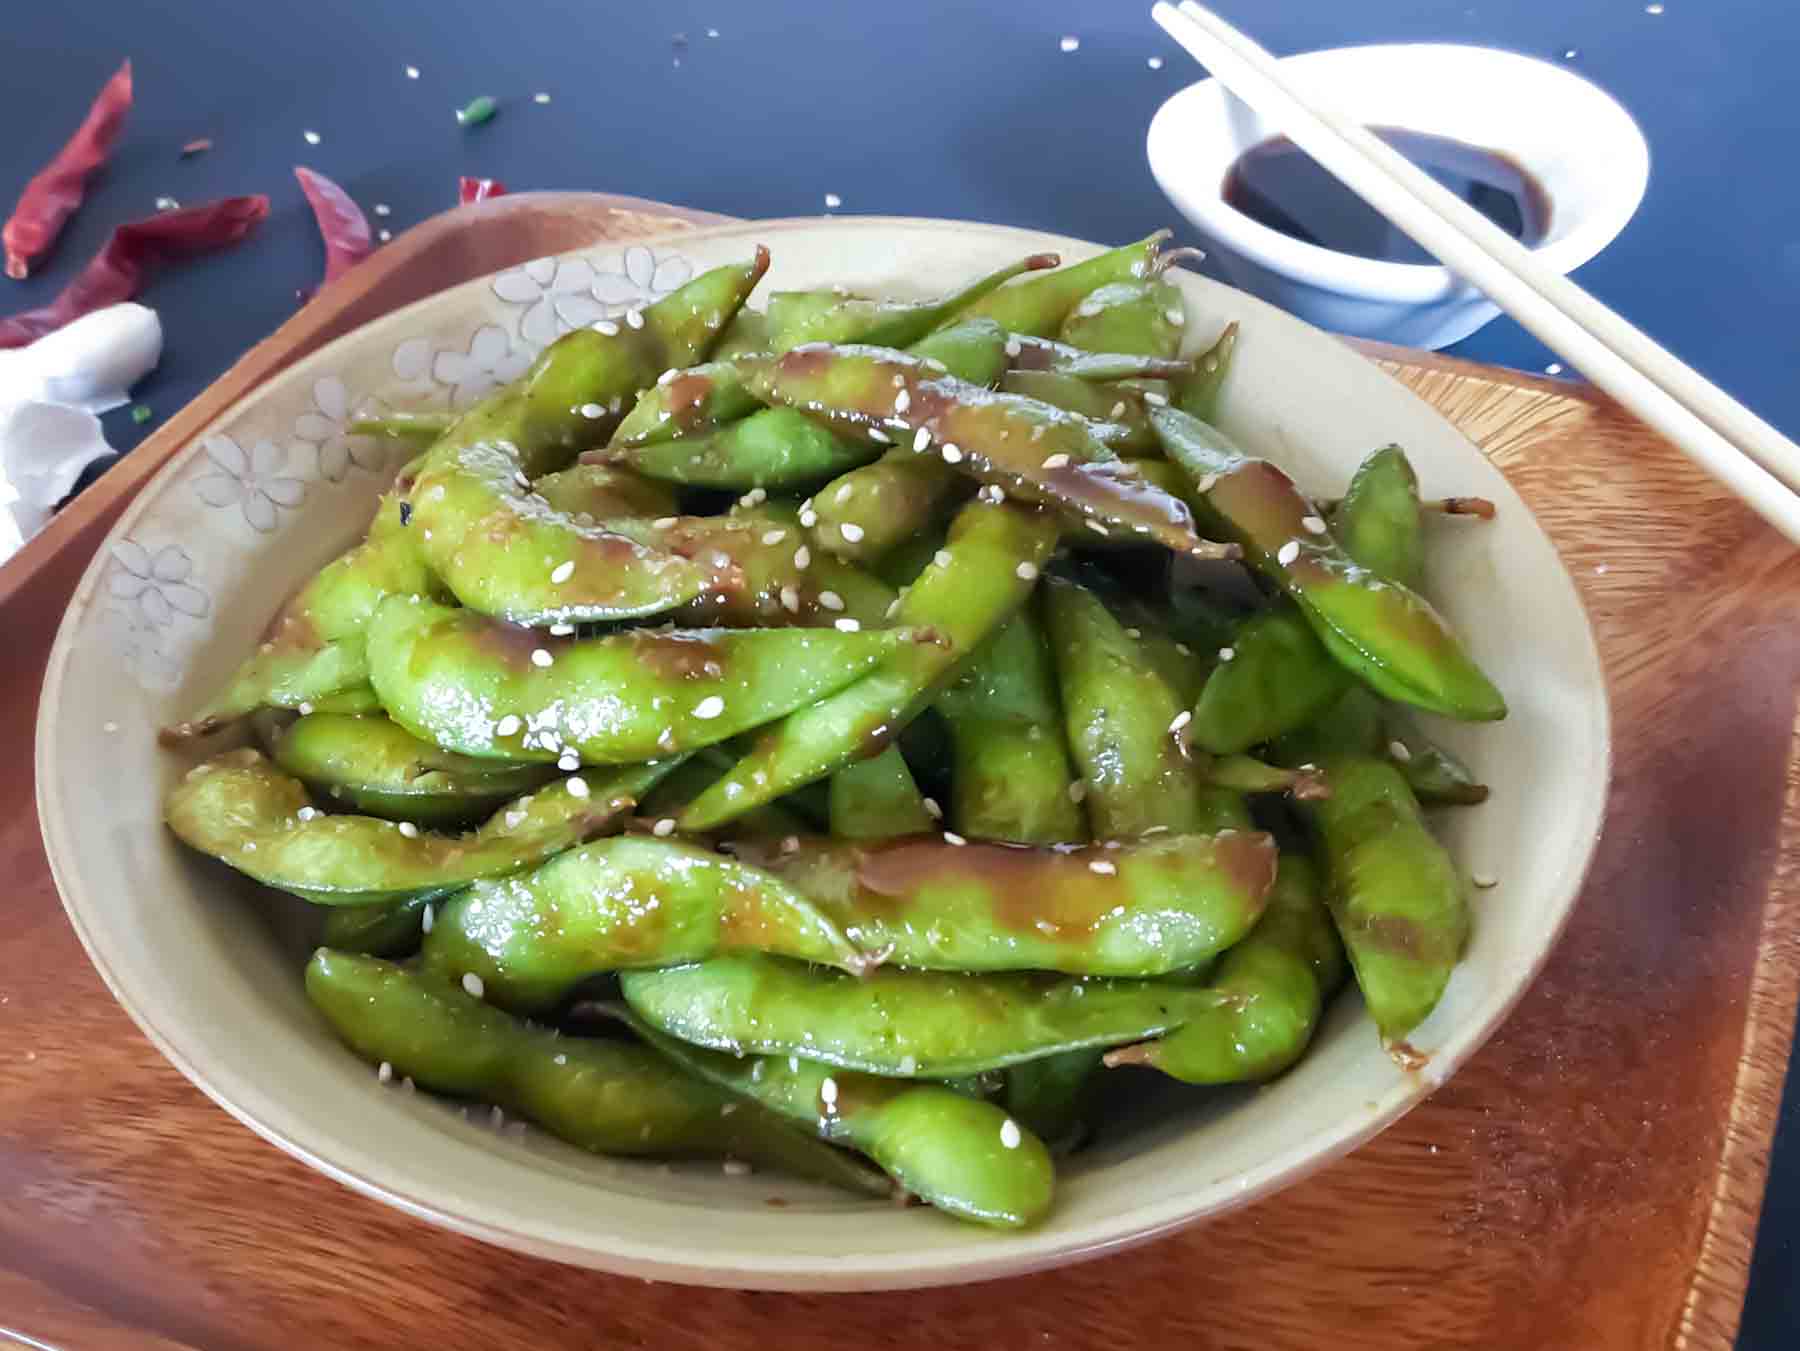 A plate full of chili garlic edamame served as an appetizer.